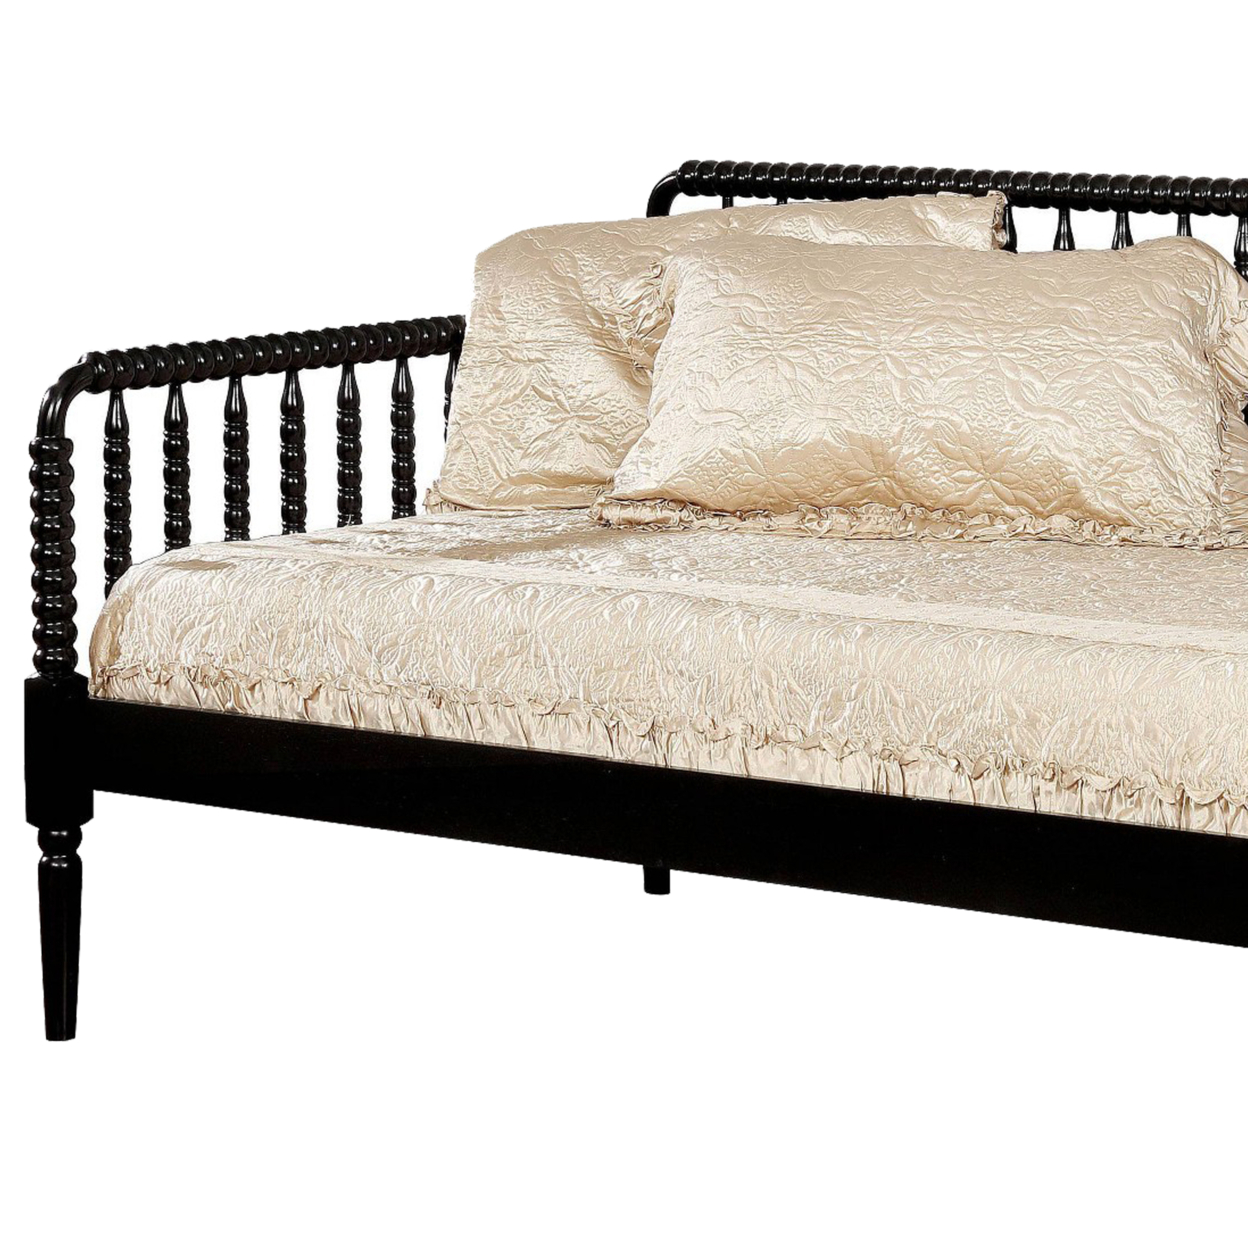 Wooden Twin Size Daybed With Spool Bed Frame And Railing Headboard, Black- Saltoro Sherpi